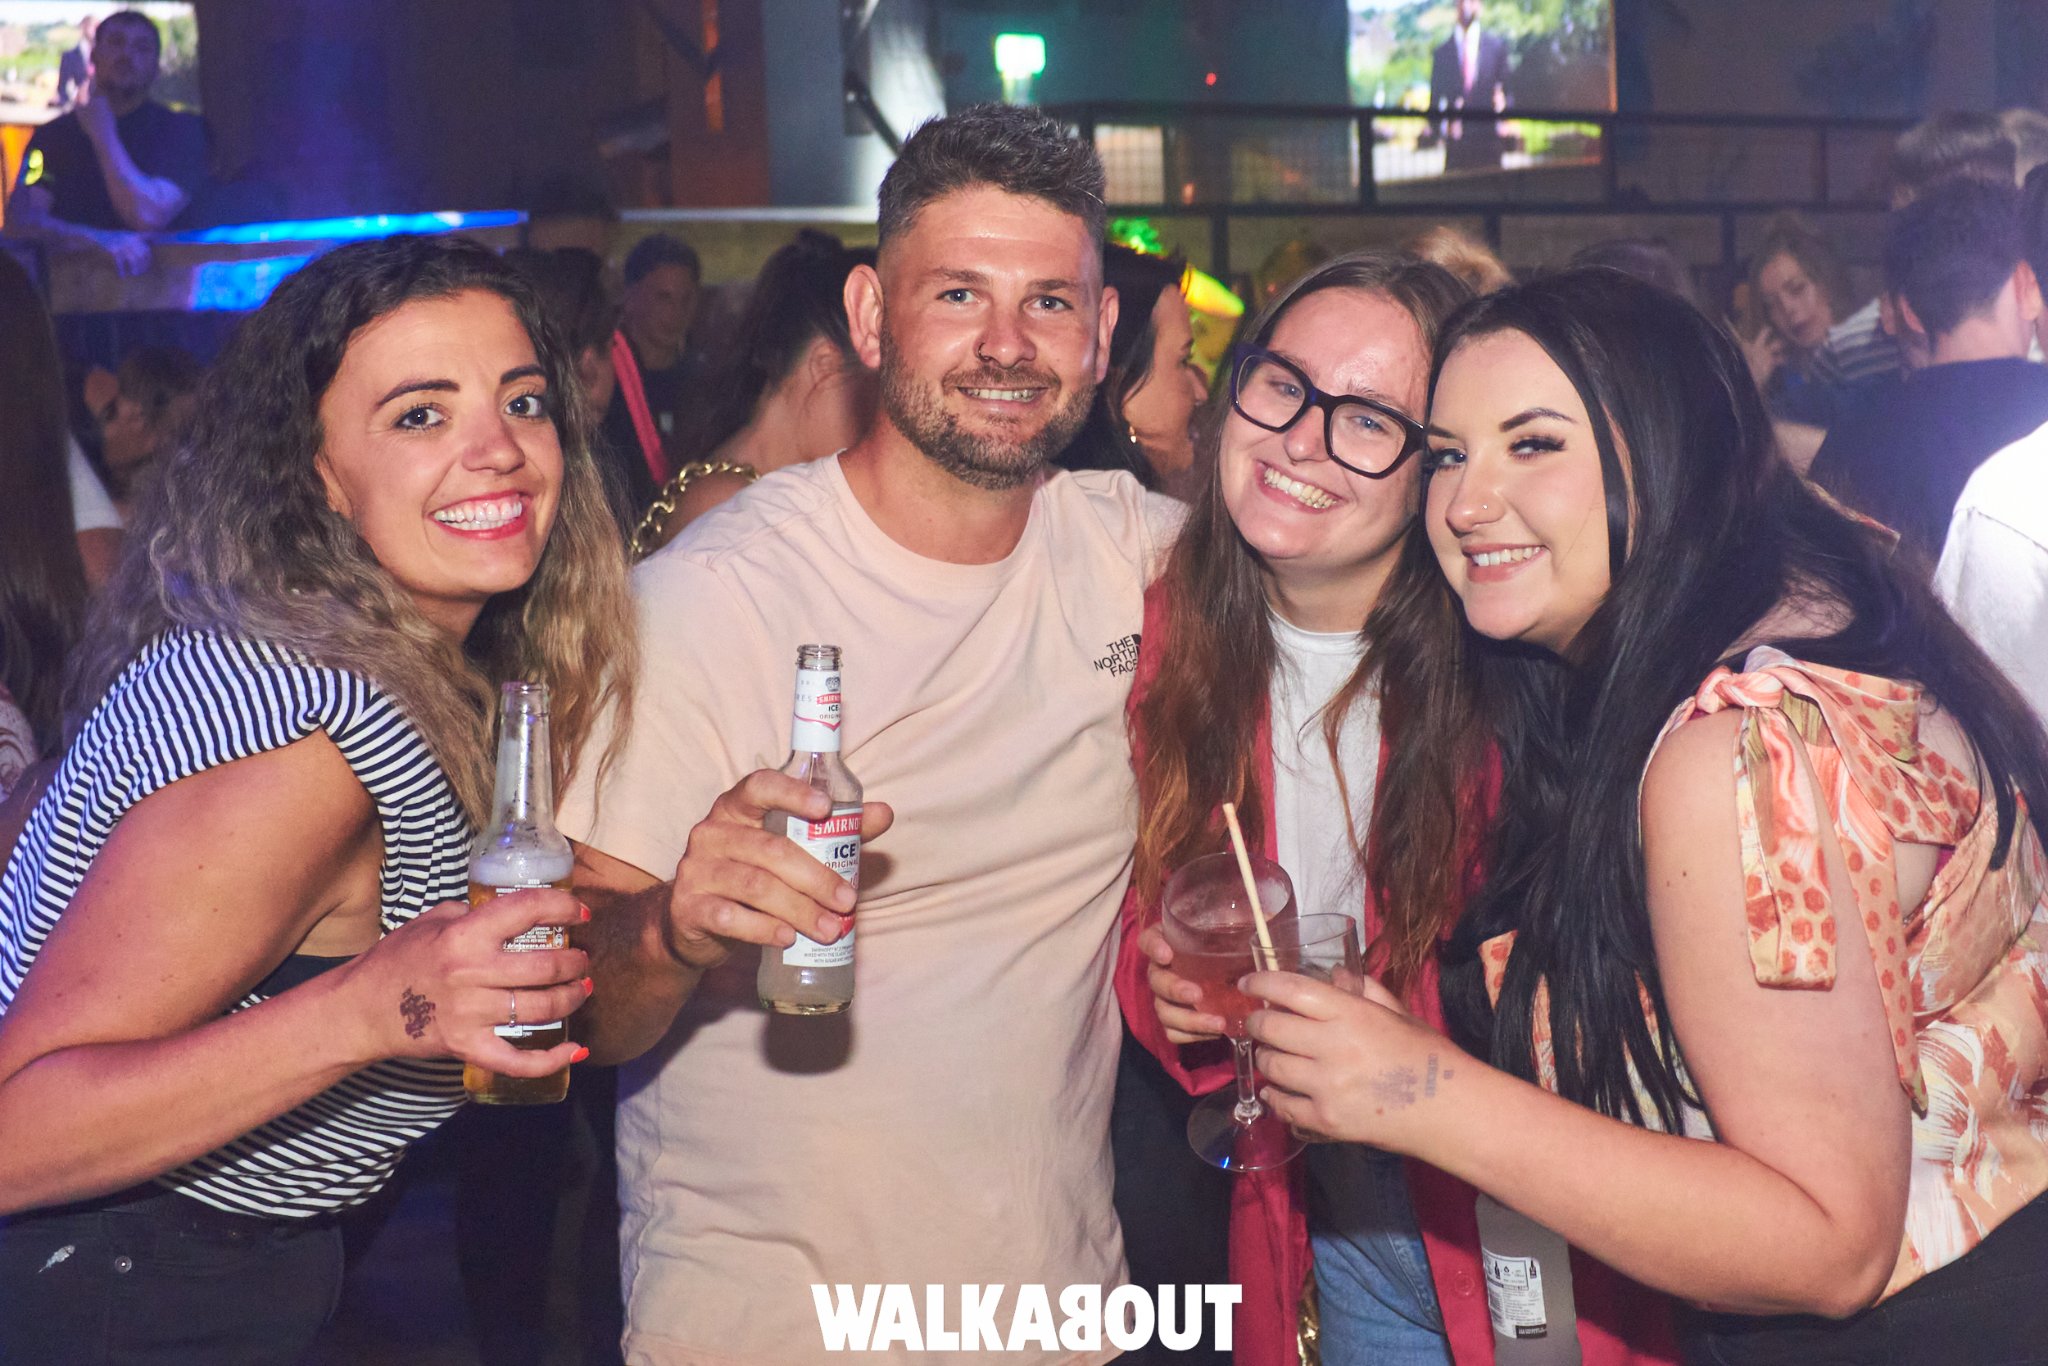 Walkabout - Plymouth